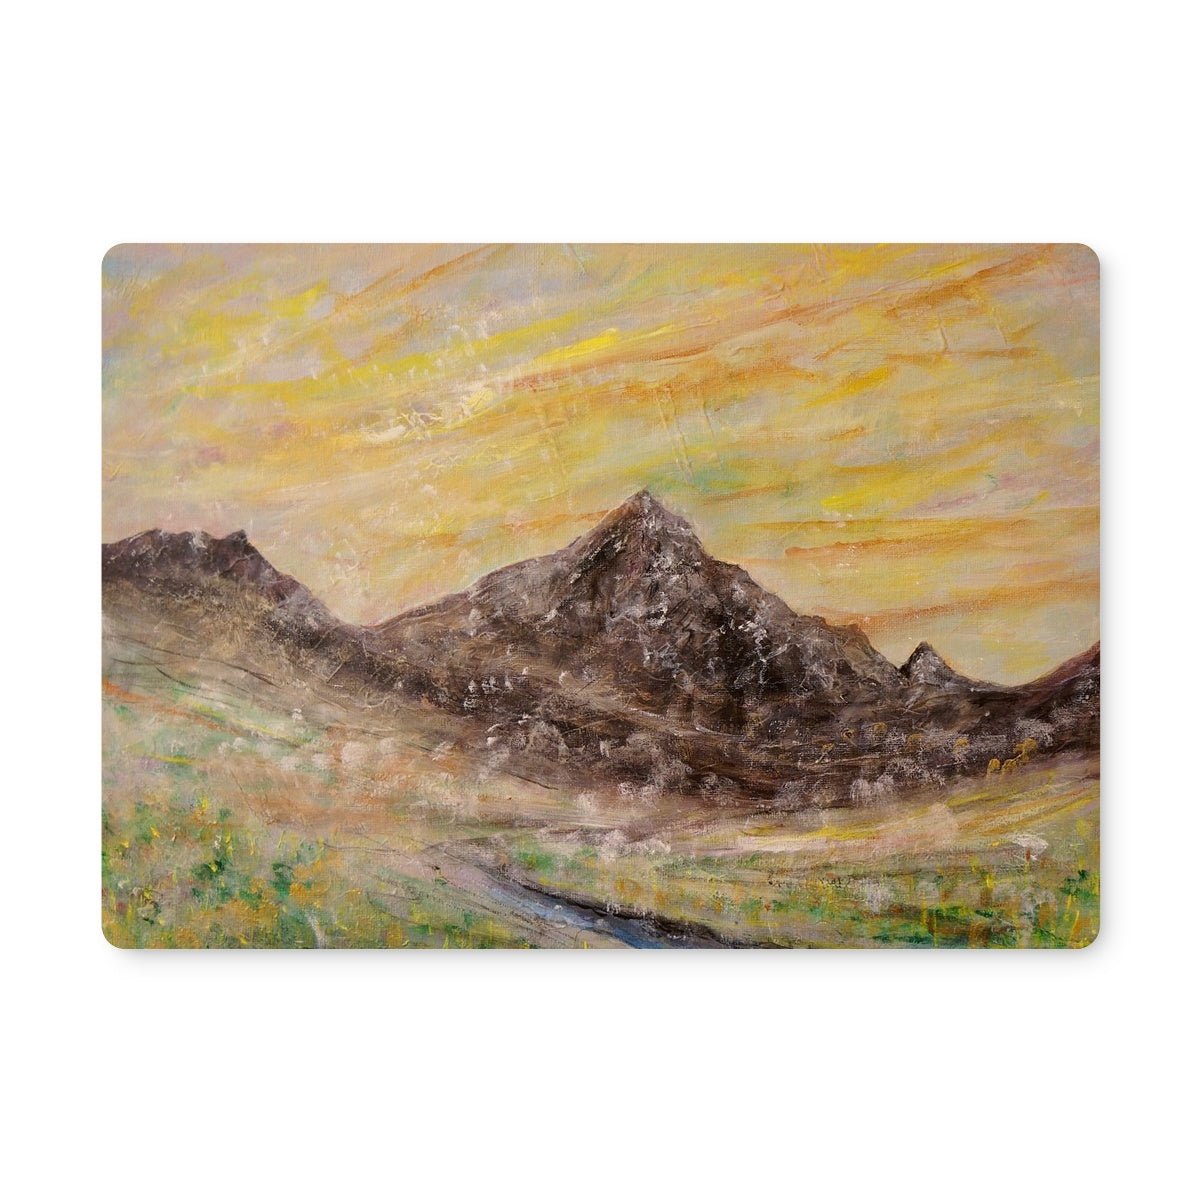 Glen Rosa Mist Arran Art Gifts Placemat-Placemats-Arran Art Gallery-6 Placemats-Paintings, Prints, Homeware, Art Gifts From Scotland By Scottish Artist Kevin Hunter